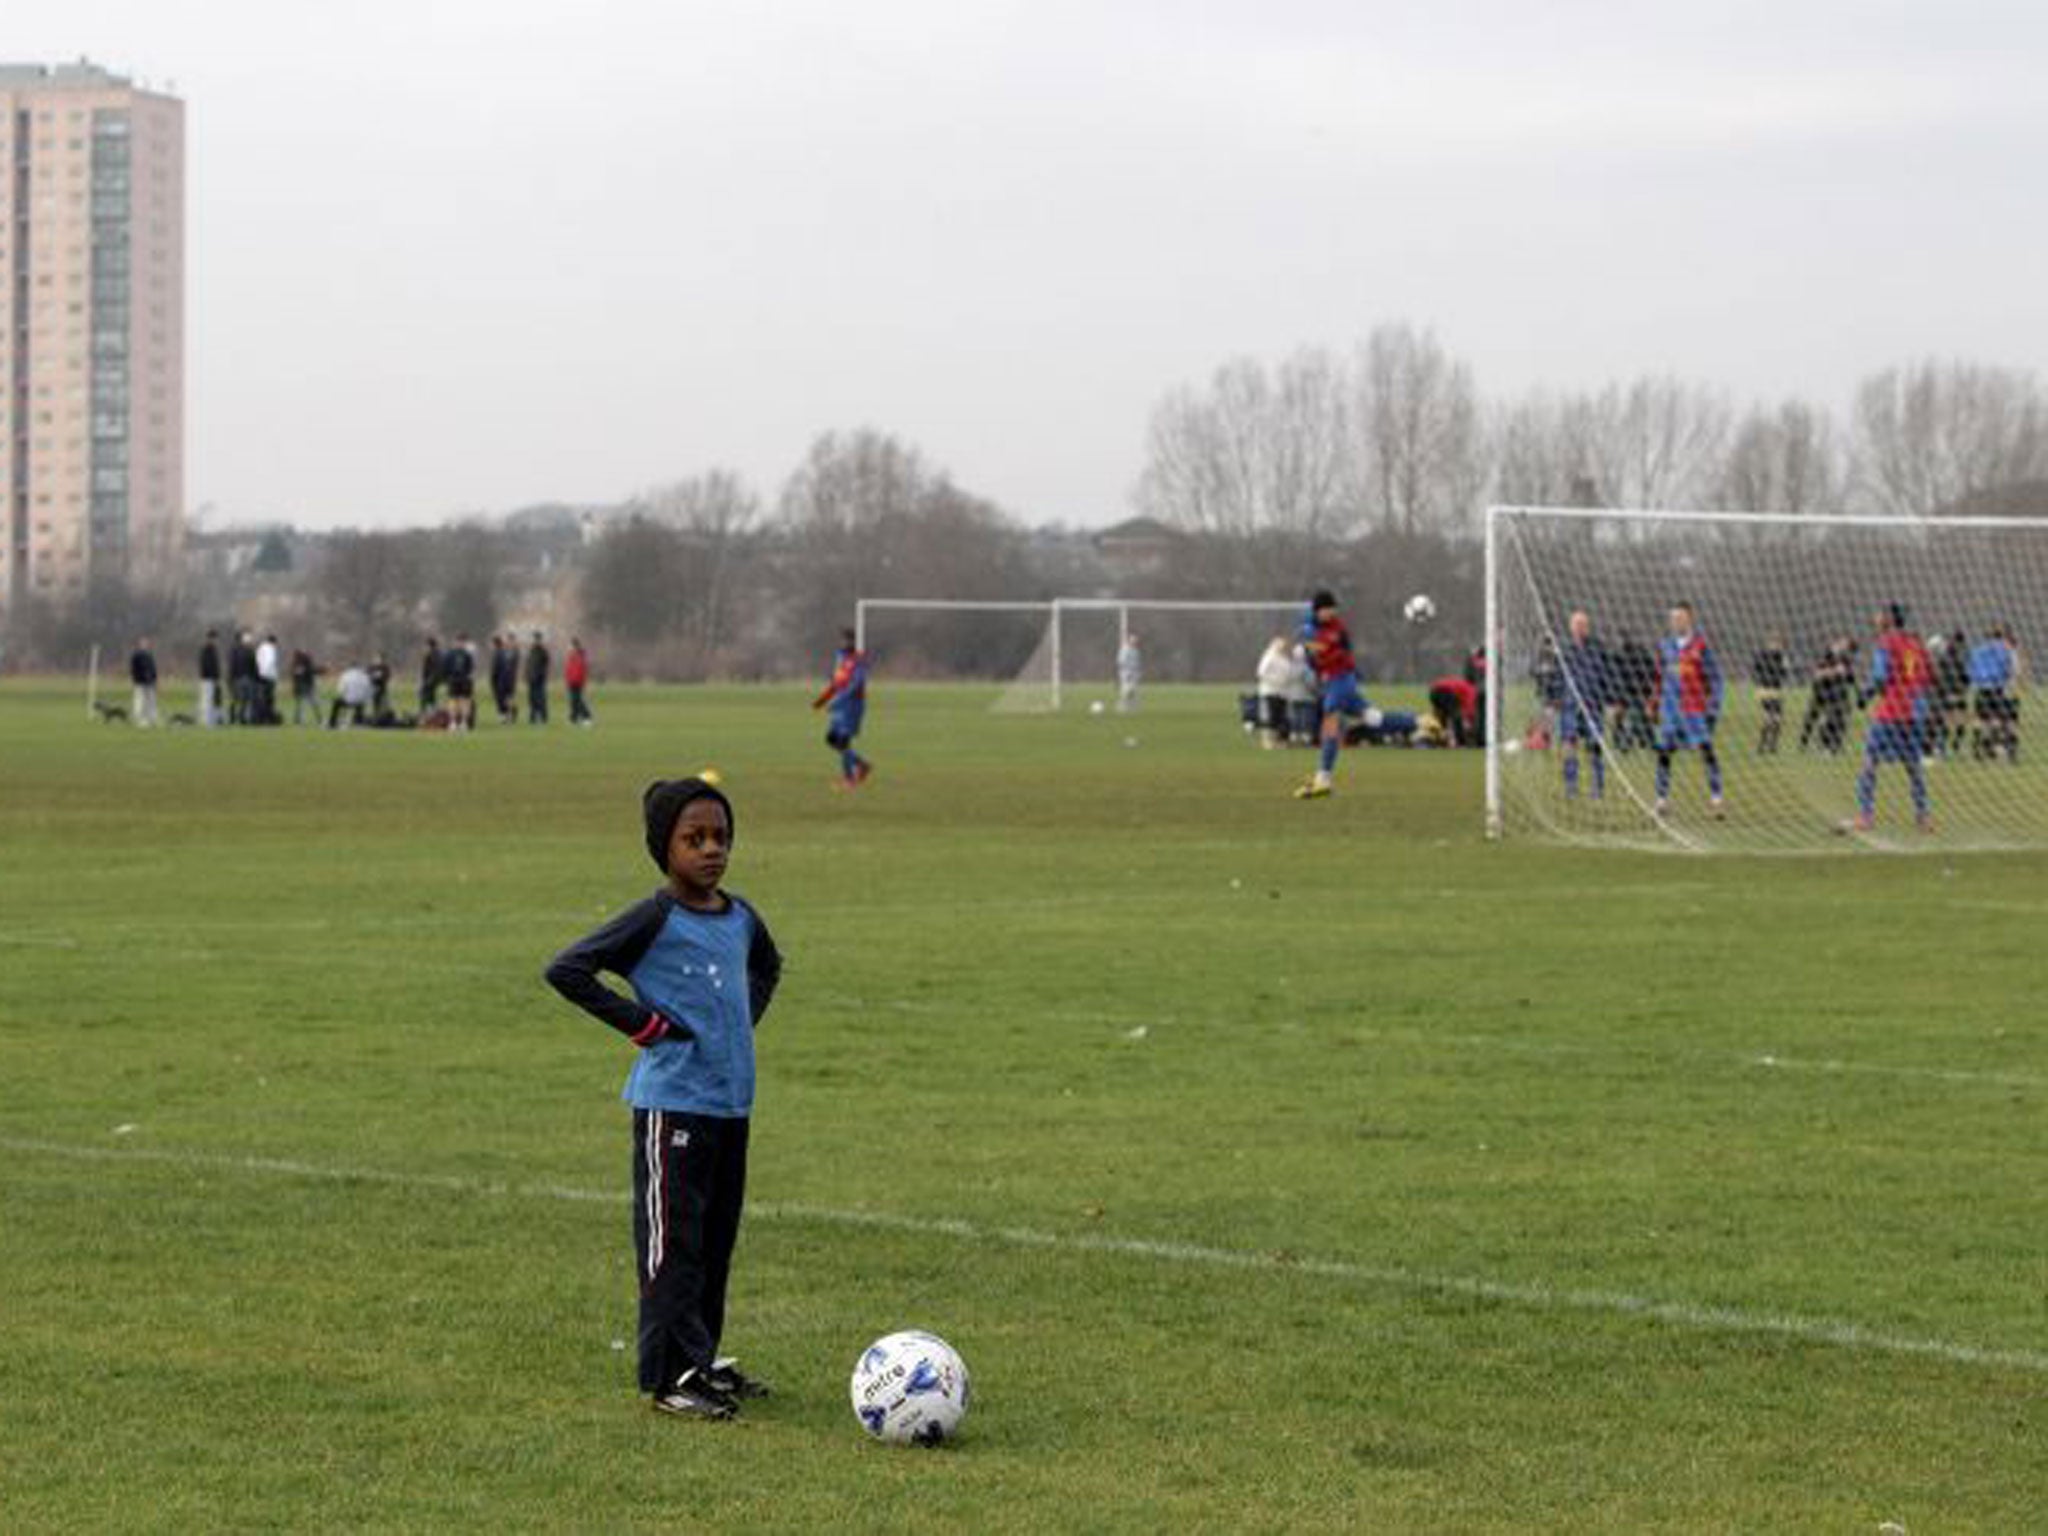 Sunday League footballers playing on Hackney Marshes